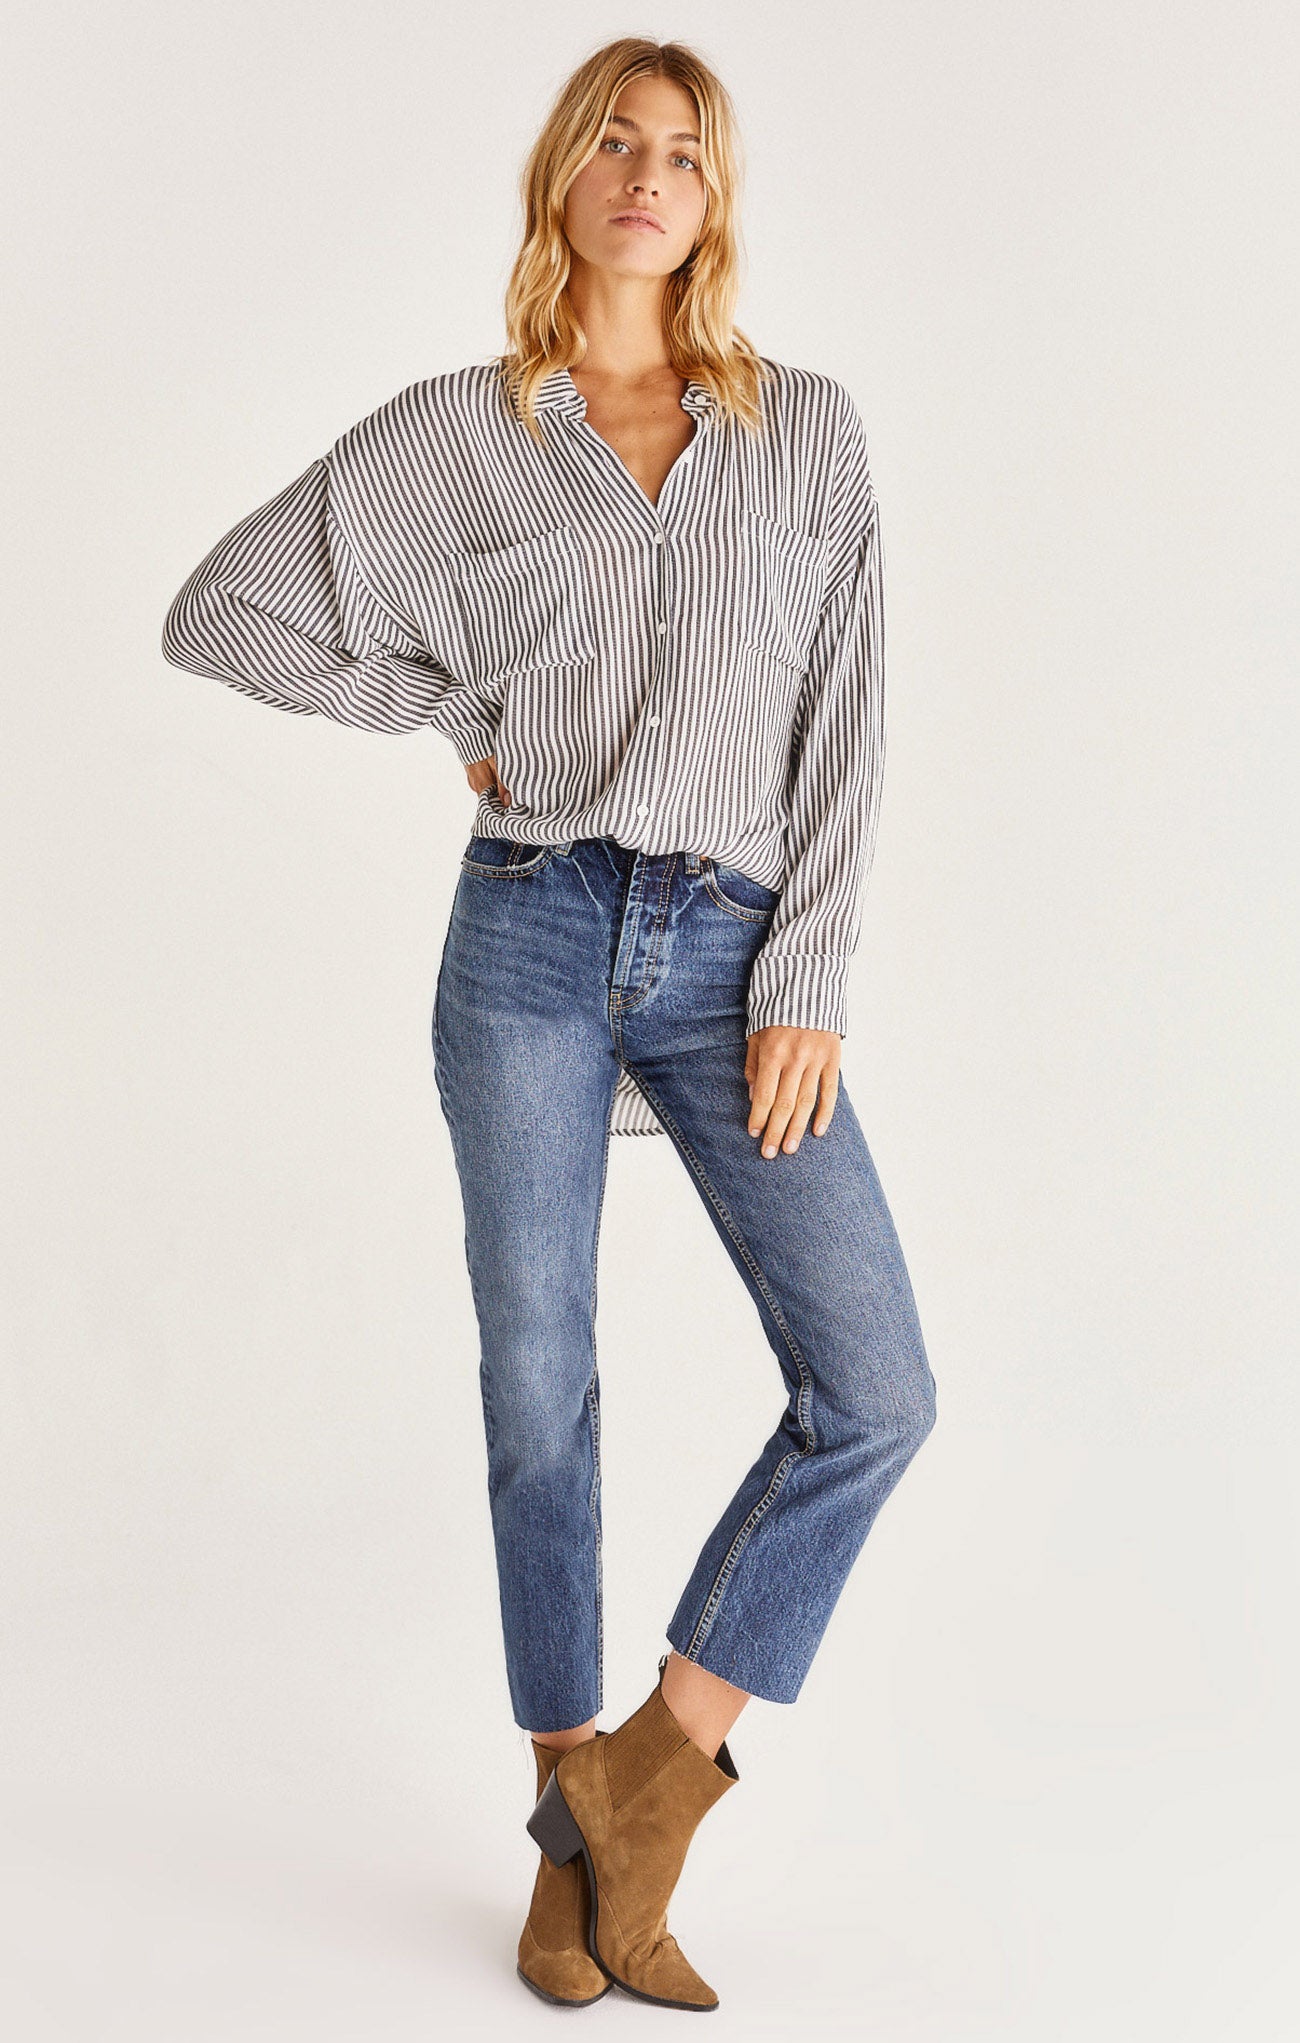 Lalo Striped Button Up Womens